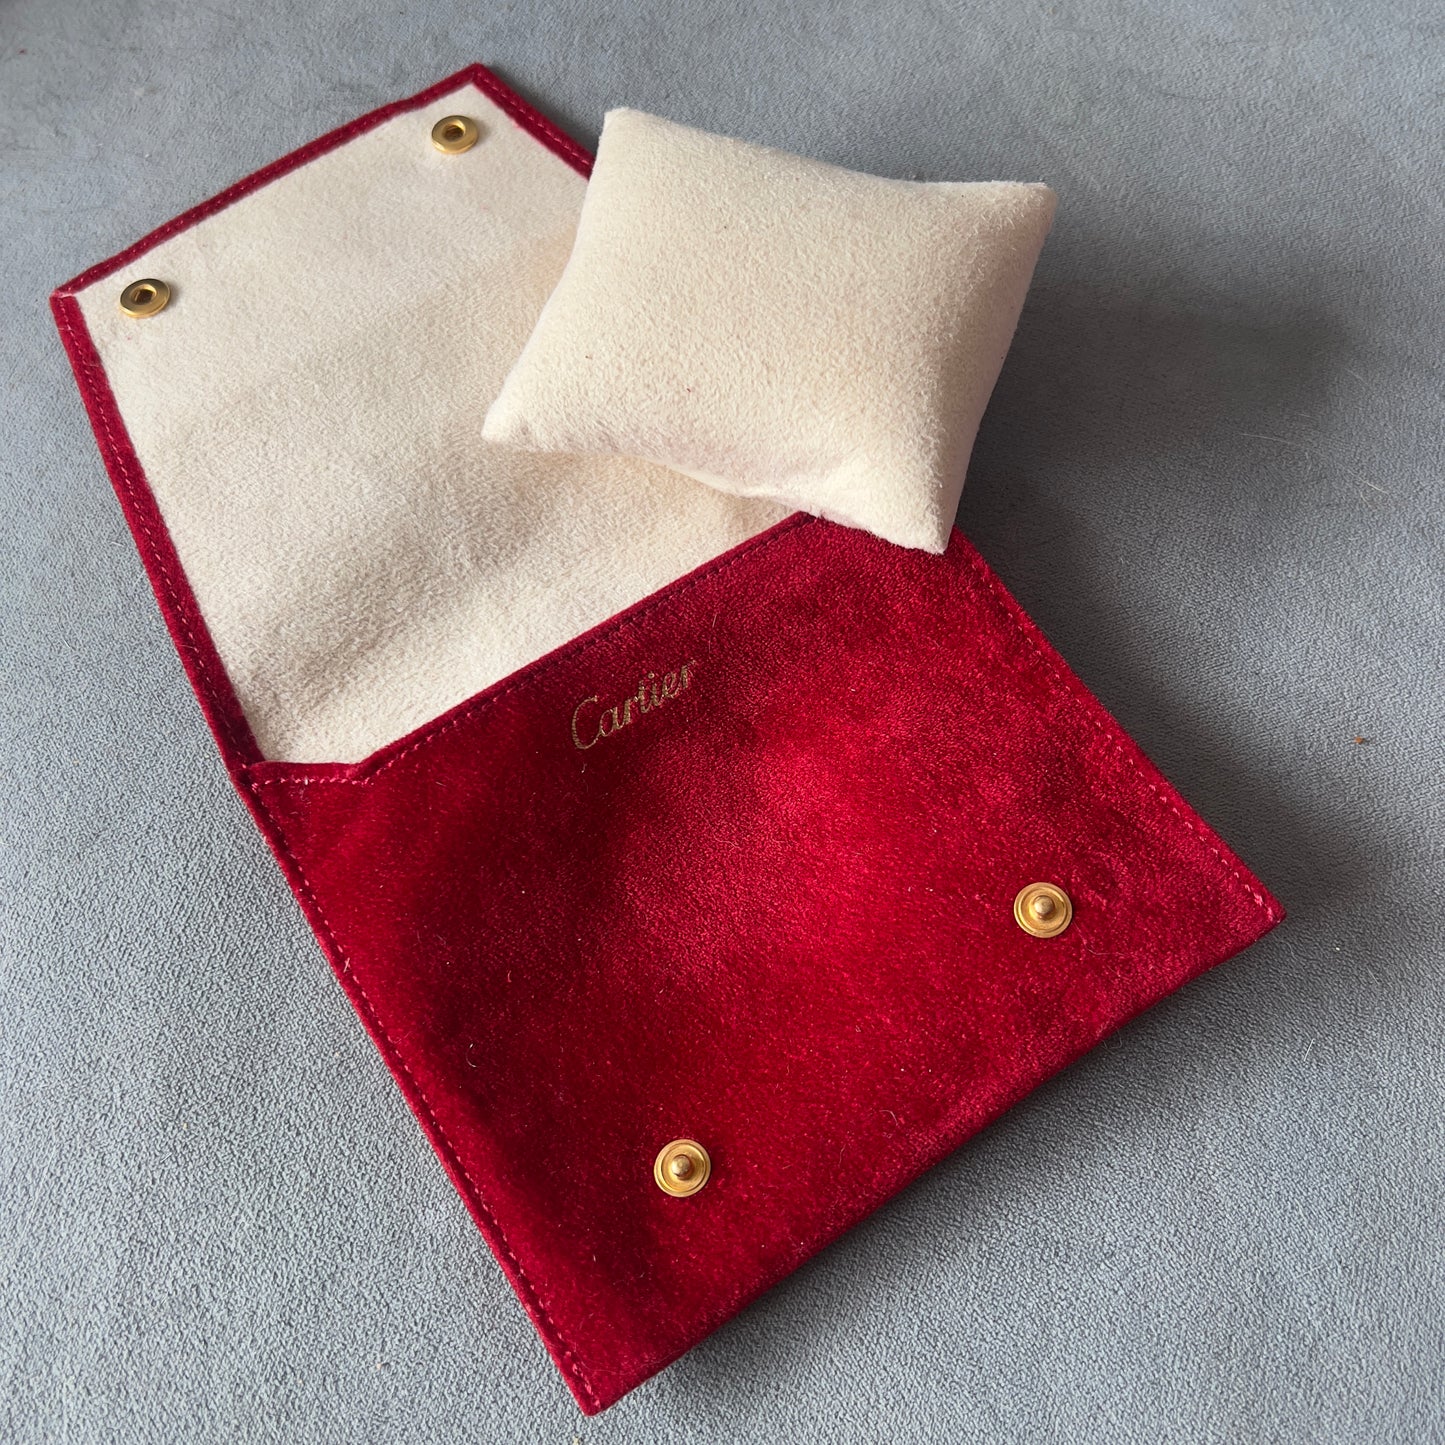 CARTIER Red Faux Suede Pouch with a Pillow 5 x 4.25 inches